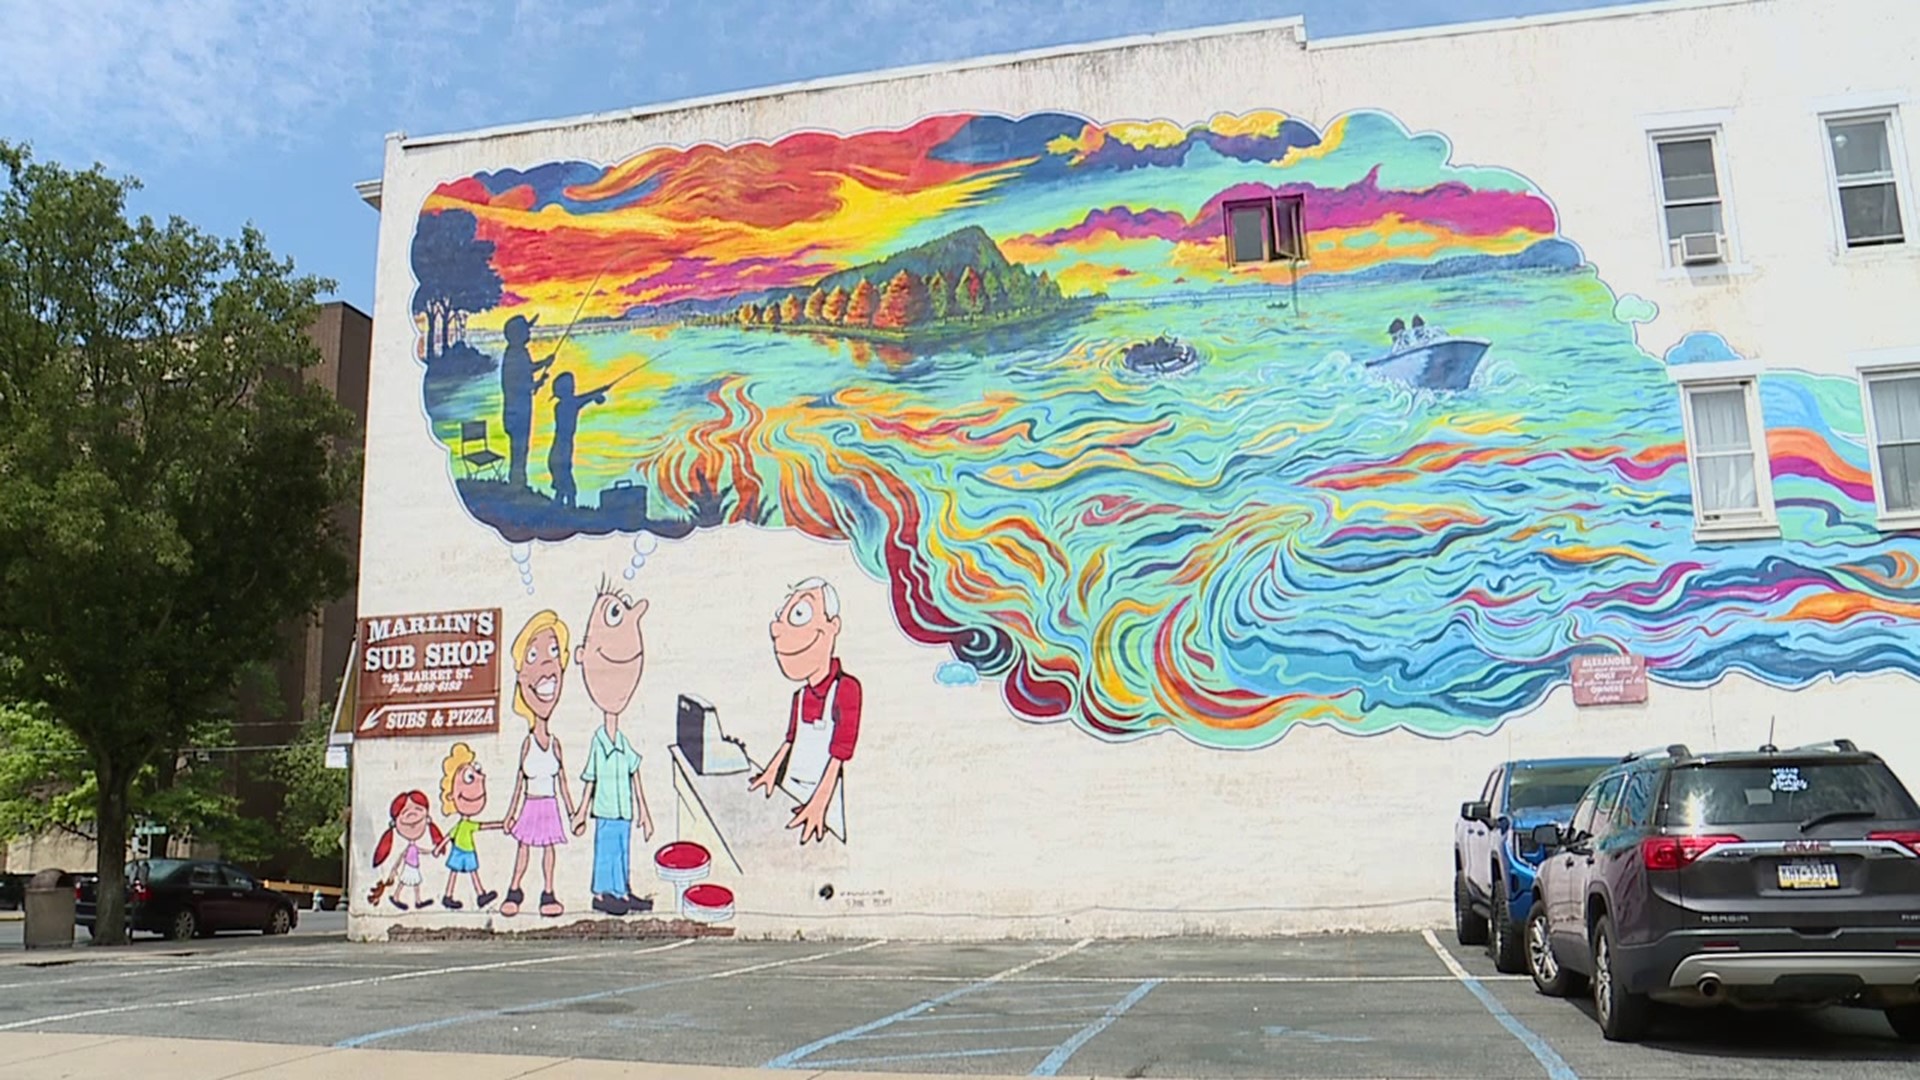 Marlin's Sub Shop on Market Street in Sunbury recently got a makeover in the form of a mural. Newswatch 16's Nikki Krize shows us what makes the picture unique.